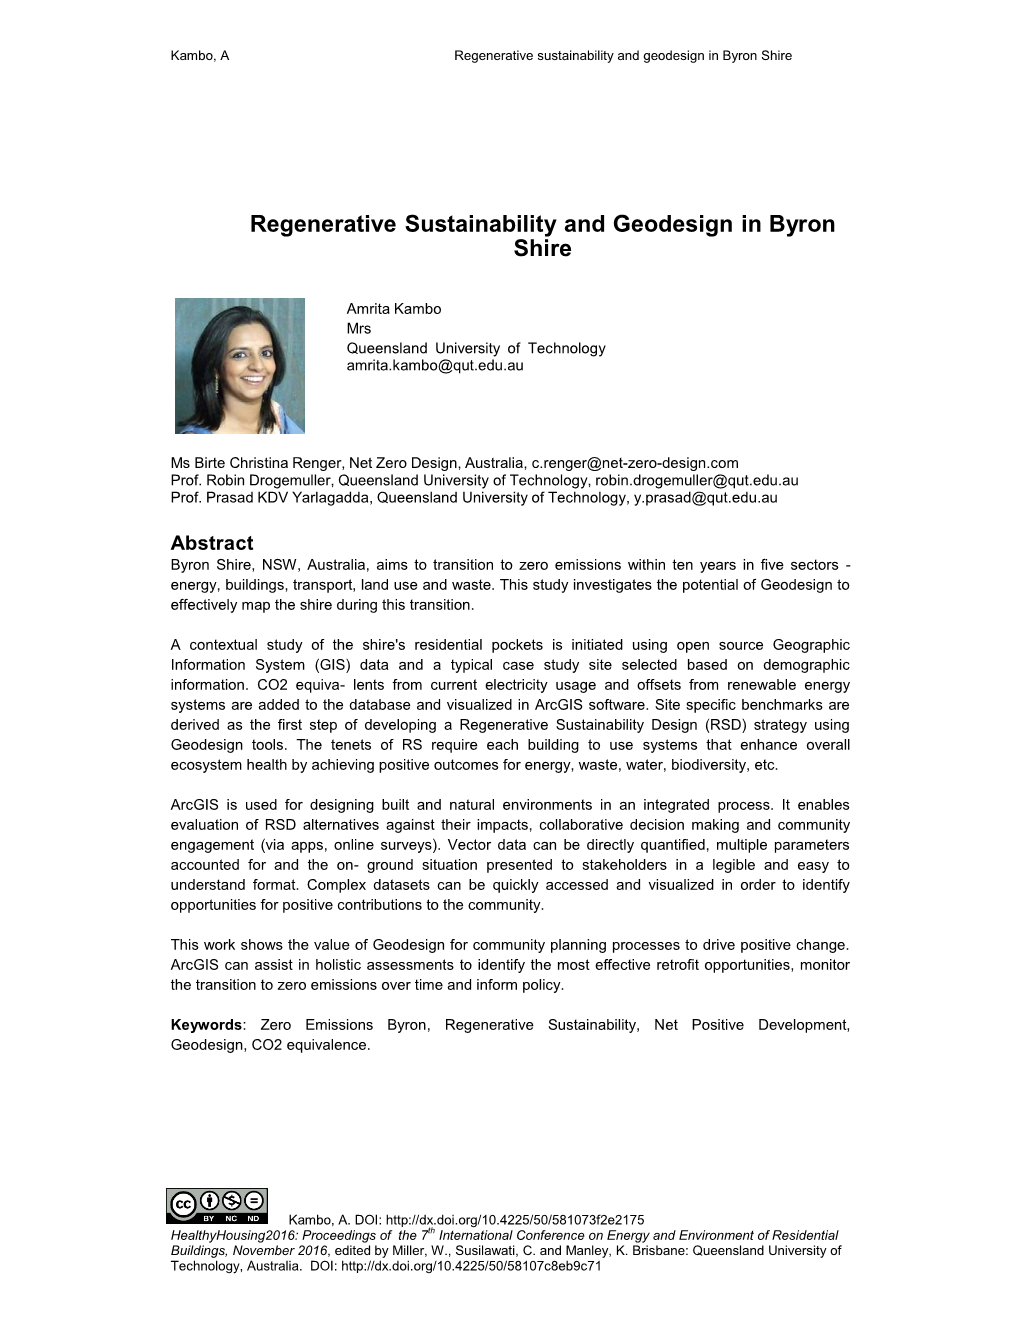 Regenerative Sustainability and Geodesign in Byron Shire